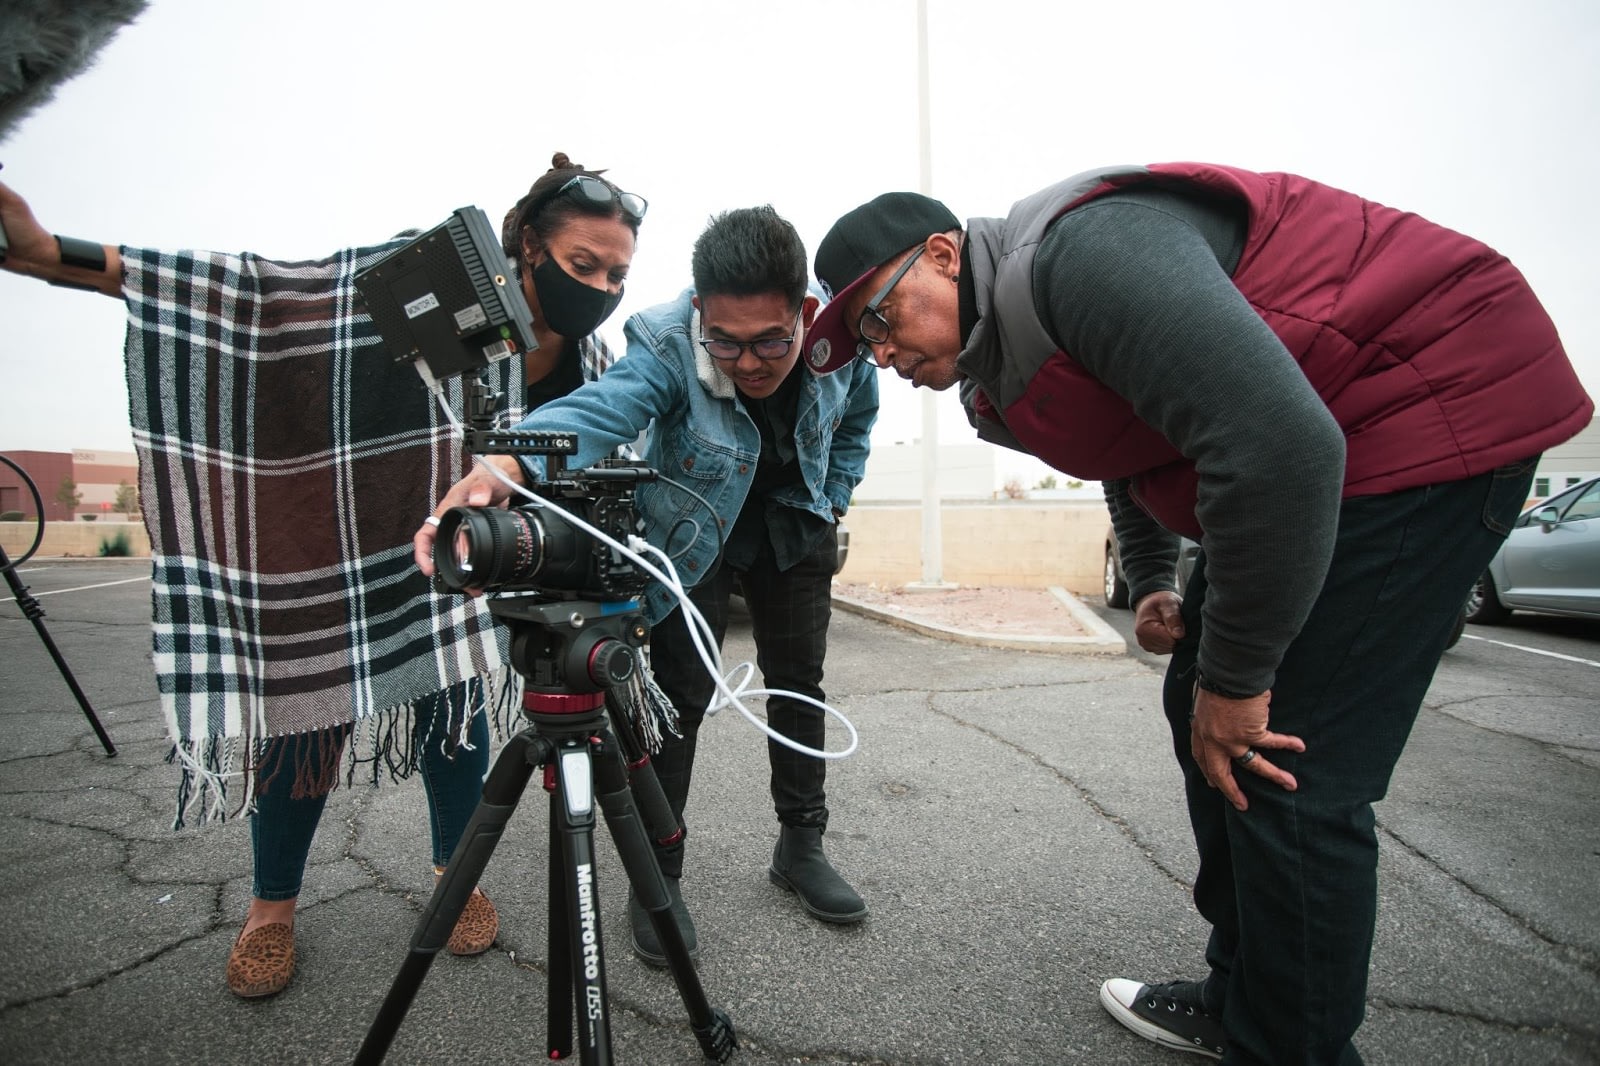 group of people bending over and looking into a camera monitor on a movie set.